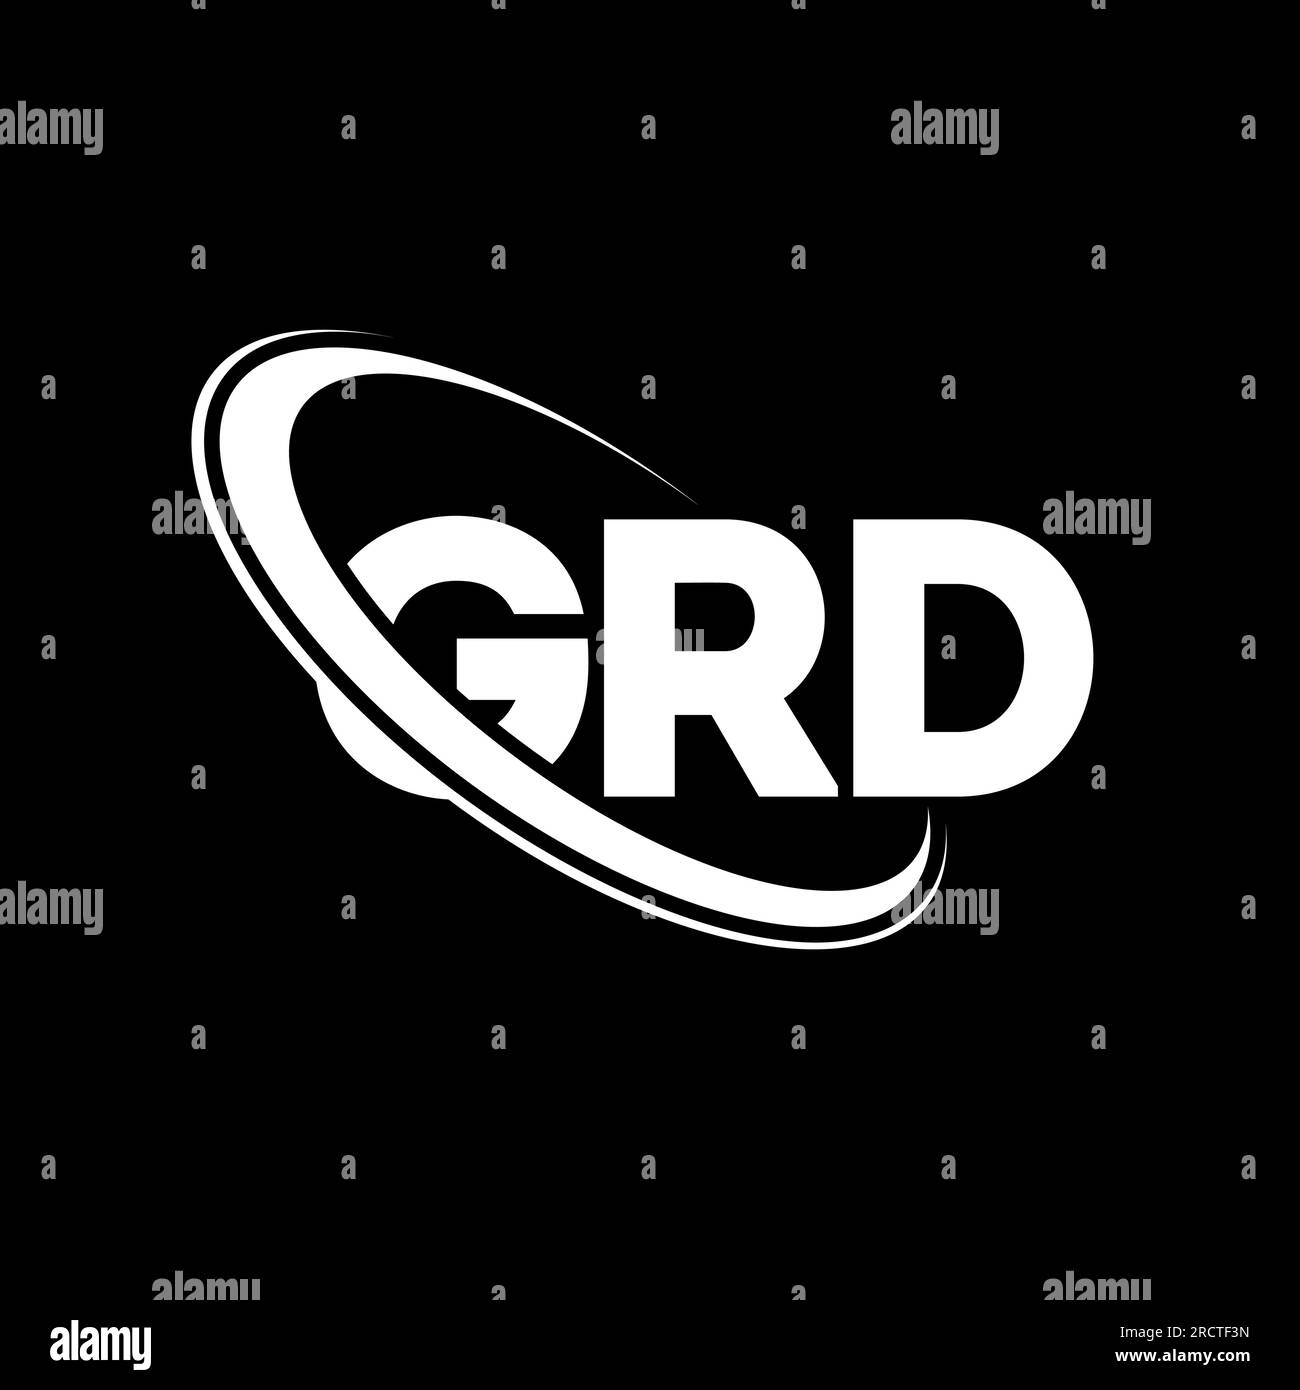 GRD logo. GRD letter. GRD letter logo design. Initials GRD logo linked with circle and uppercase monogram logo. GRD typography for technology, busines Stock Vector